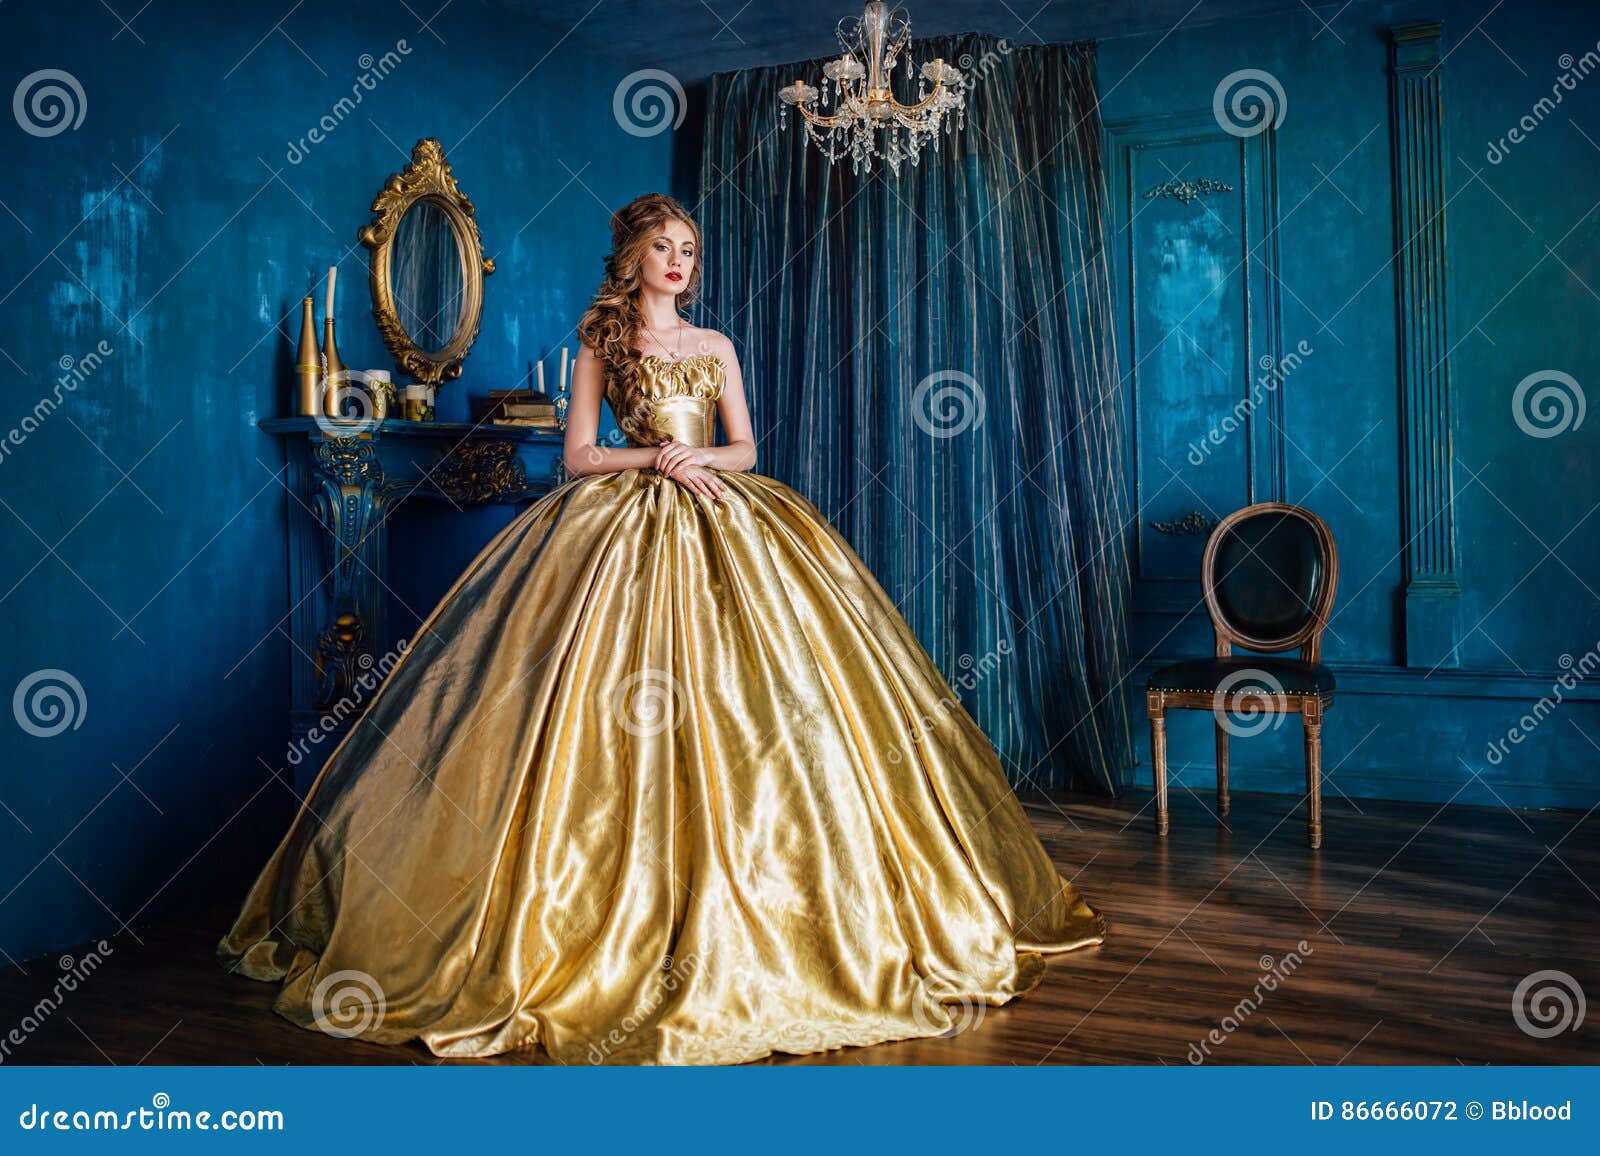 13 296 Ball Gown Photos Free Royalty Free Stock Photos From Dreamstime